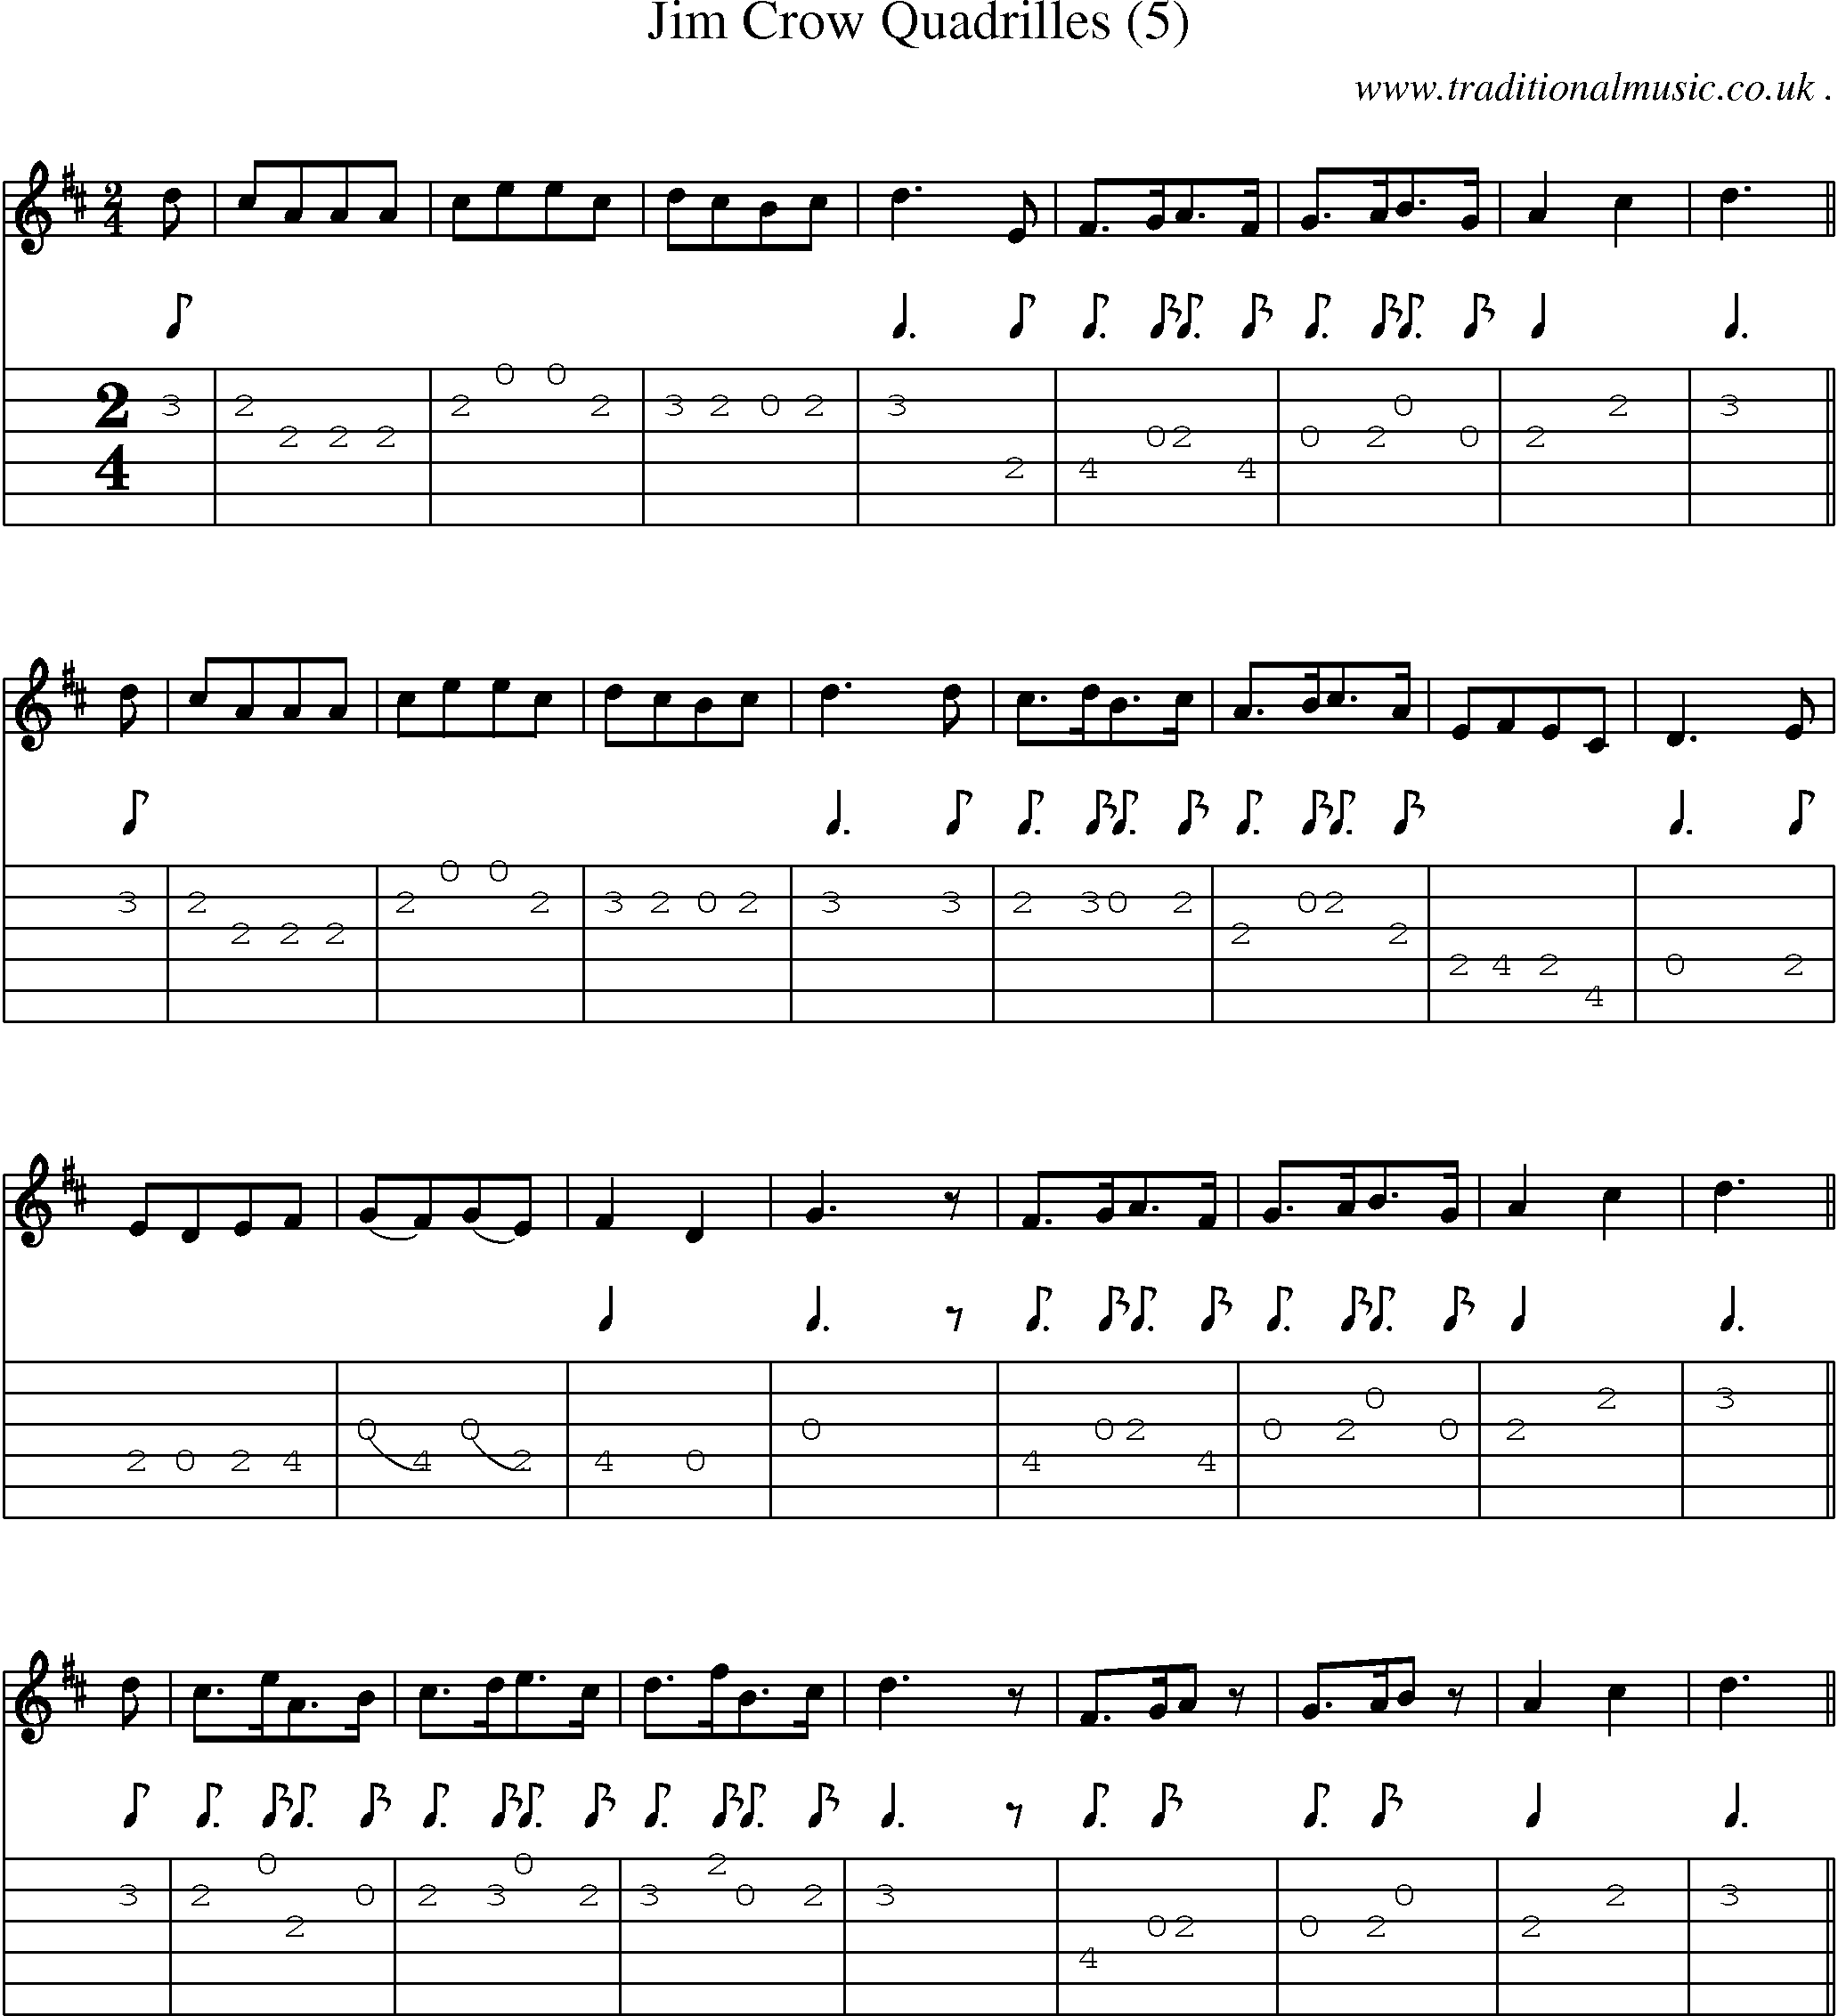 Sheet-Music and Guitar Tabs for Jim Crow Quadrilles (5)